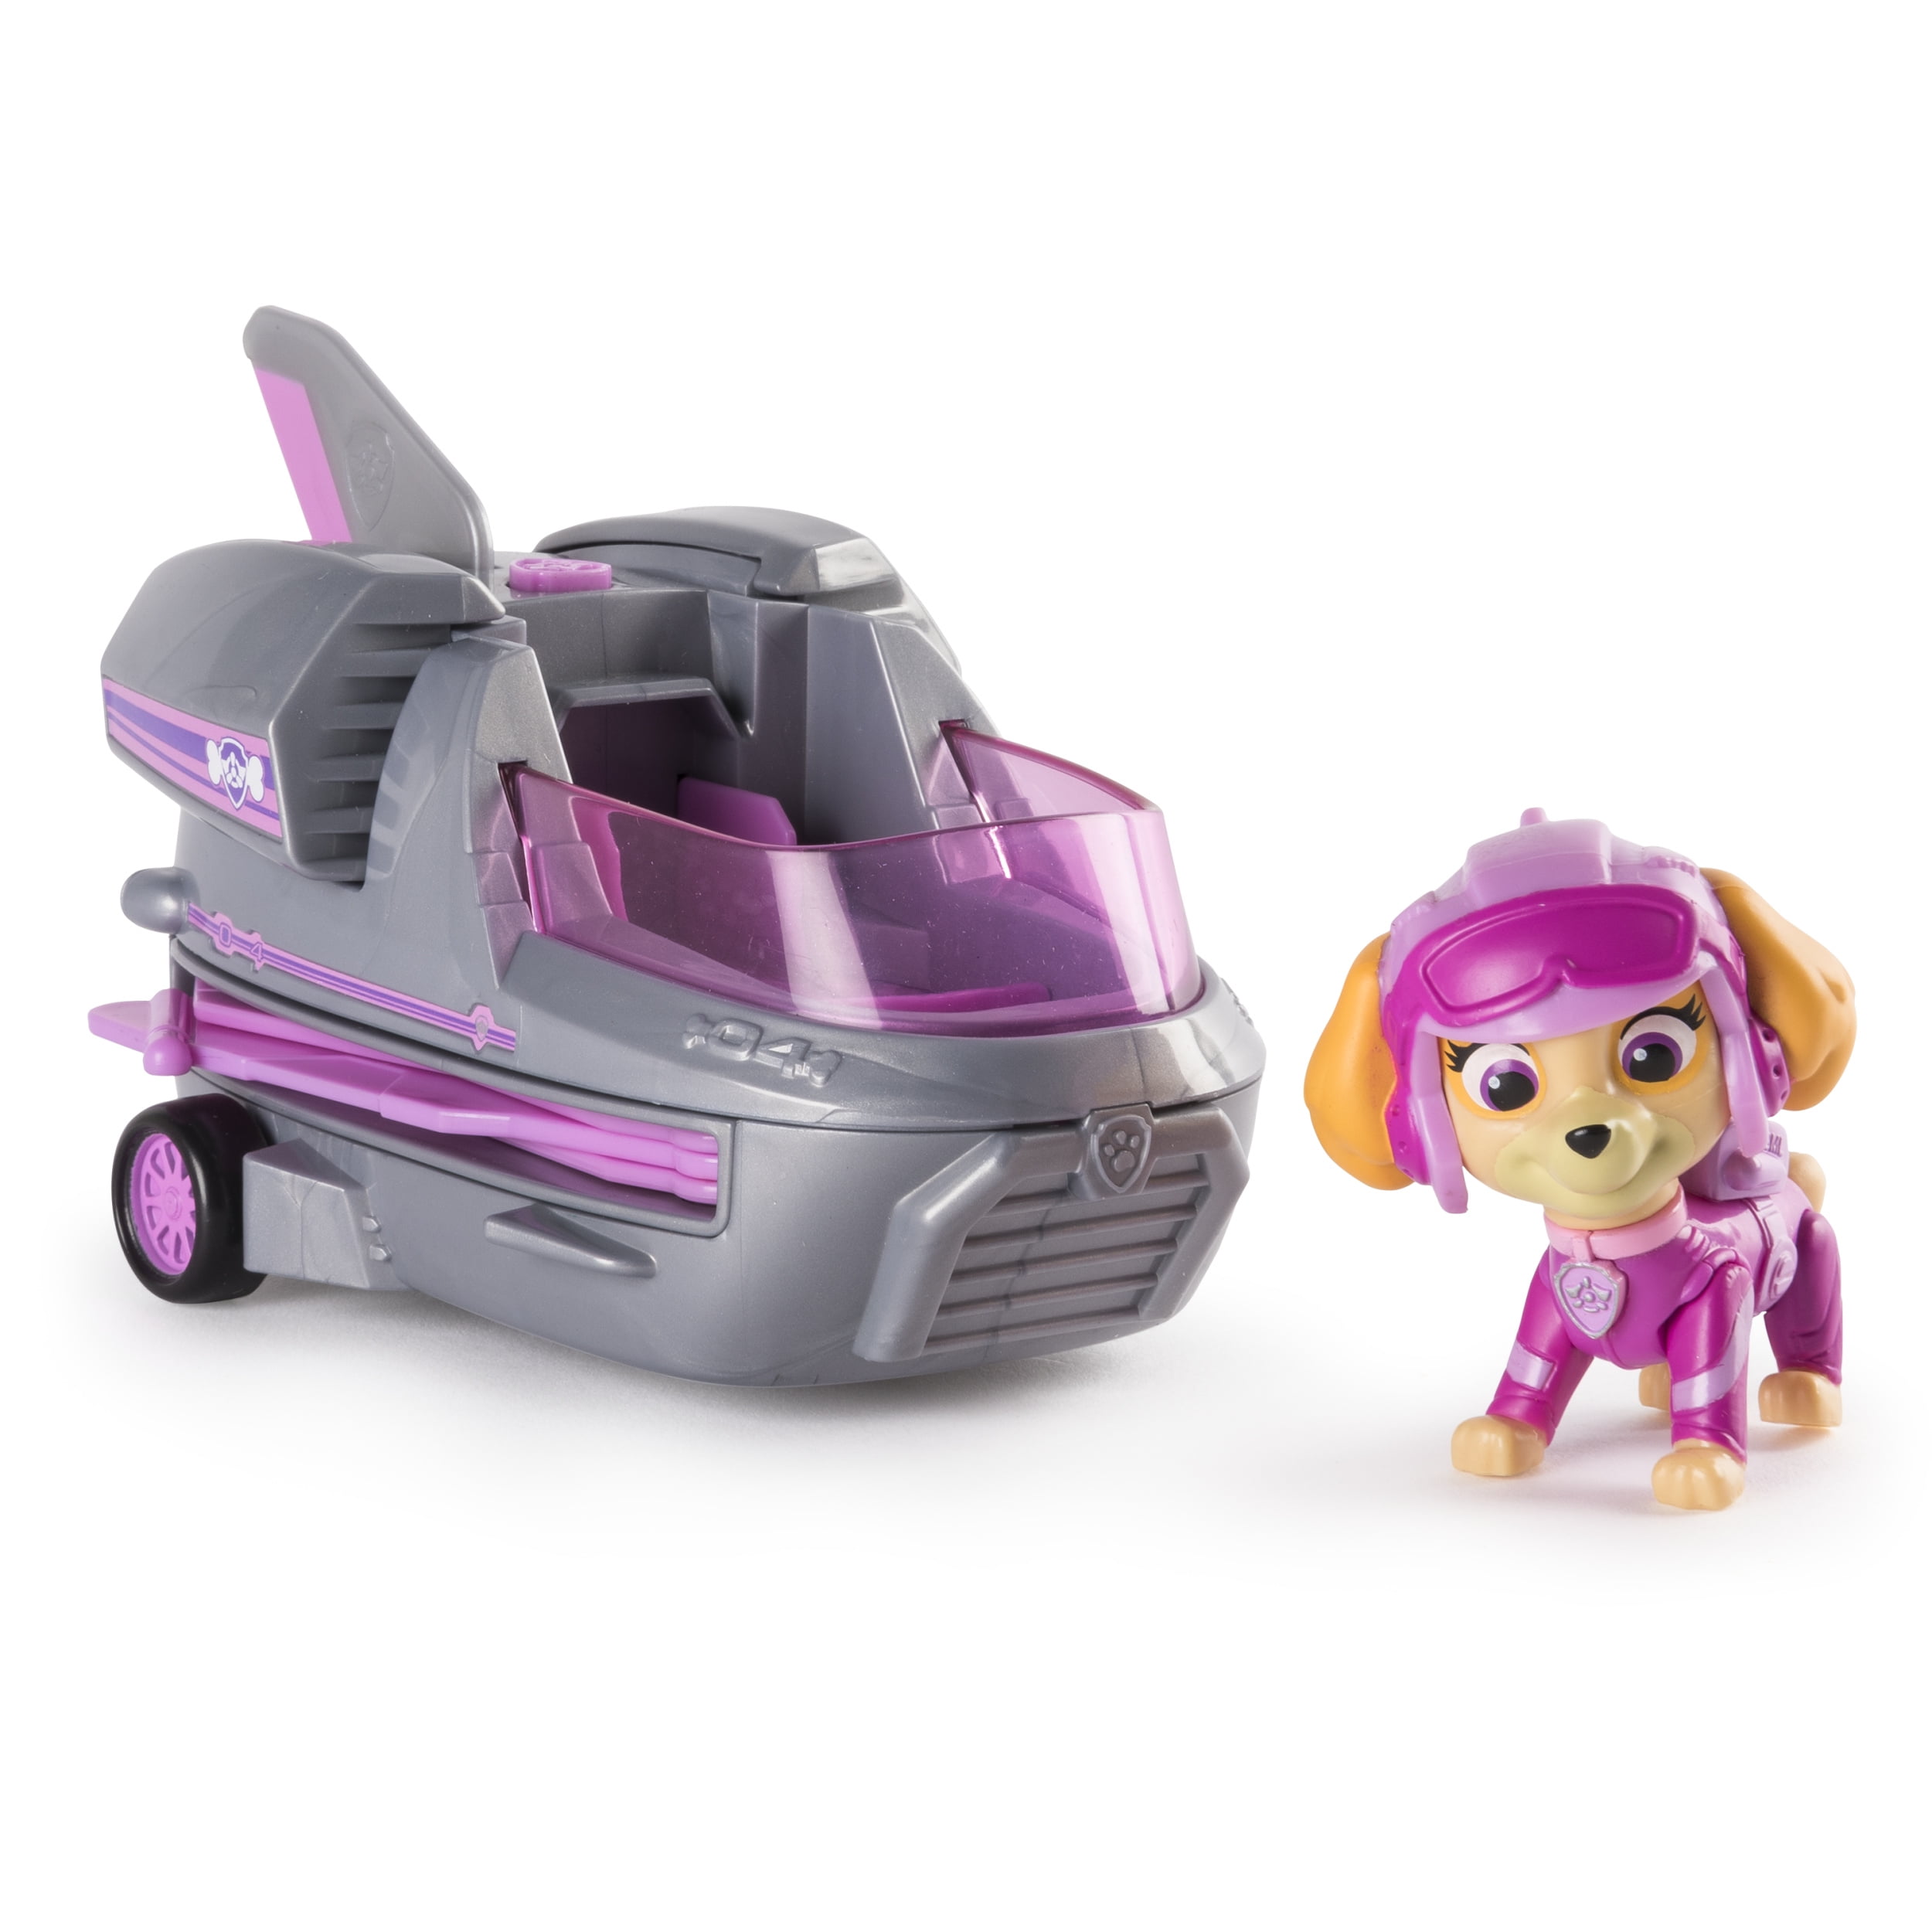 PAW Patrol Skye's Rescue Jet with Play Vehicle